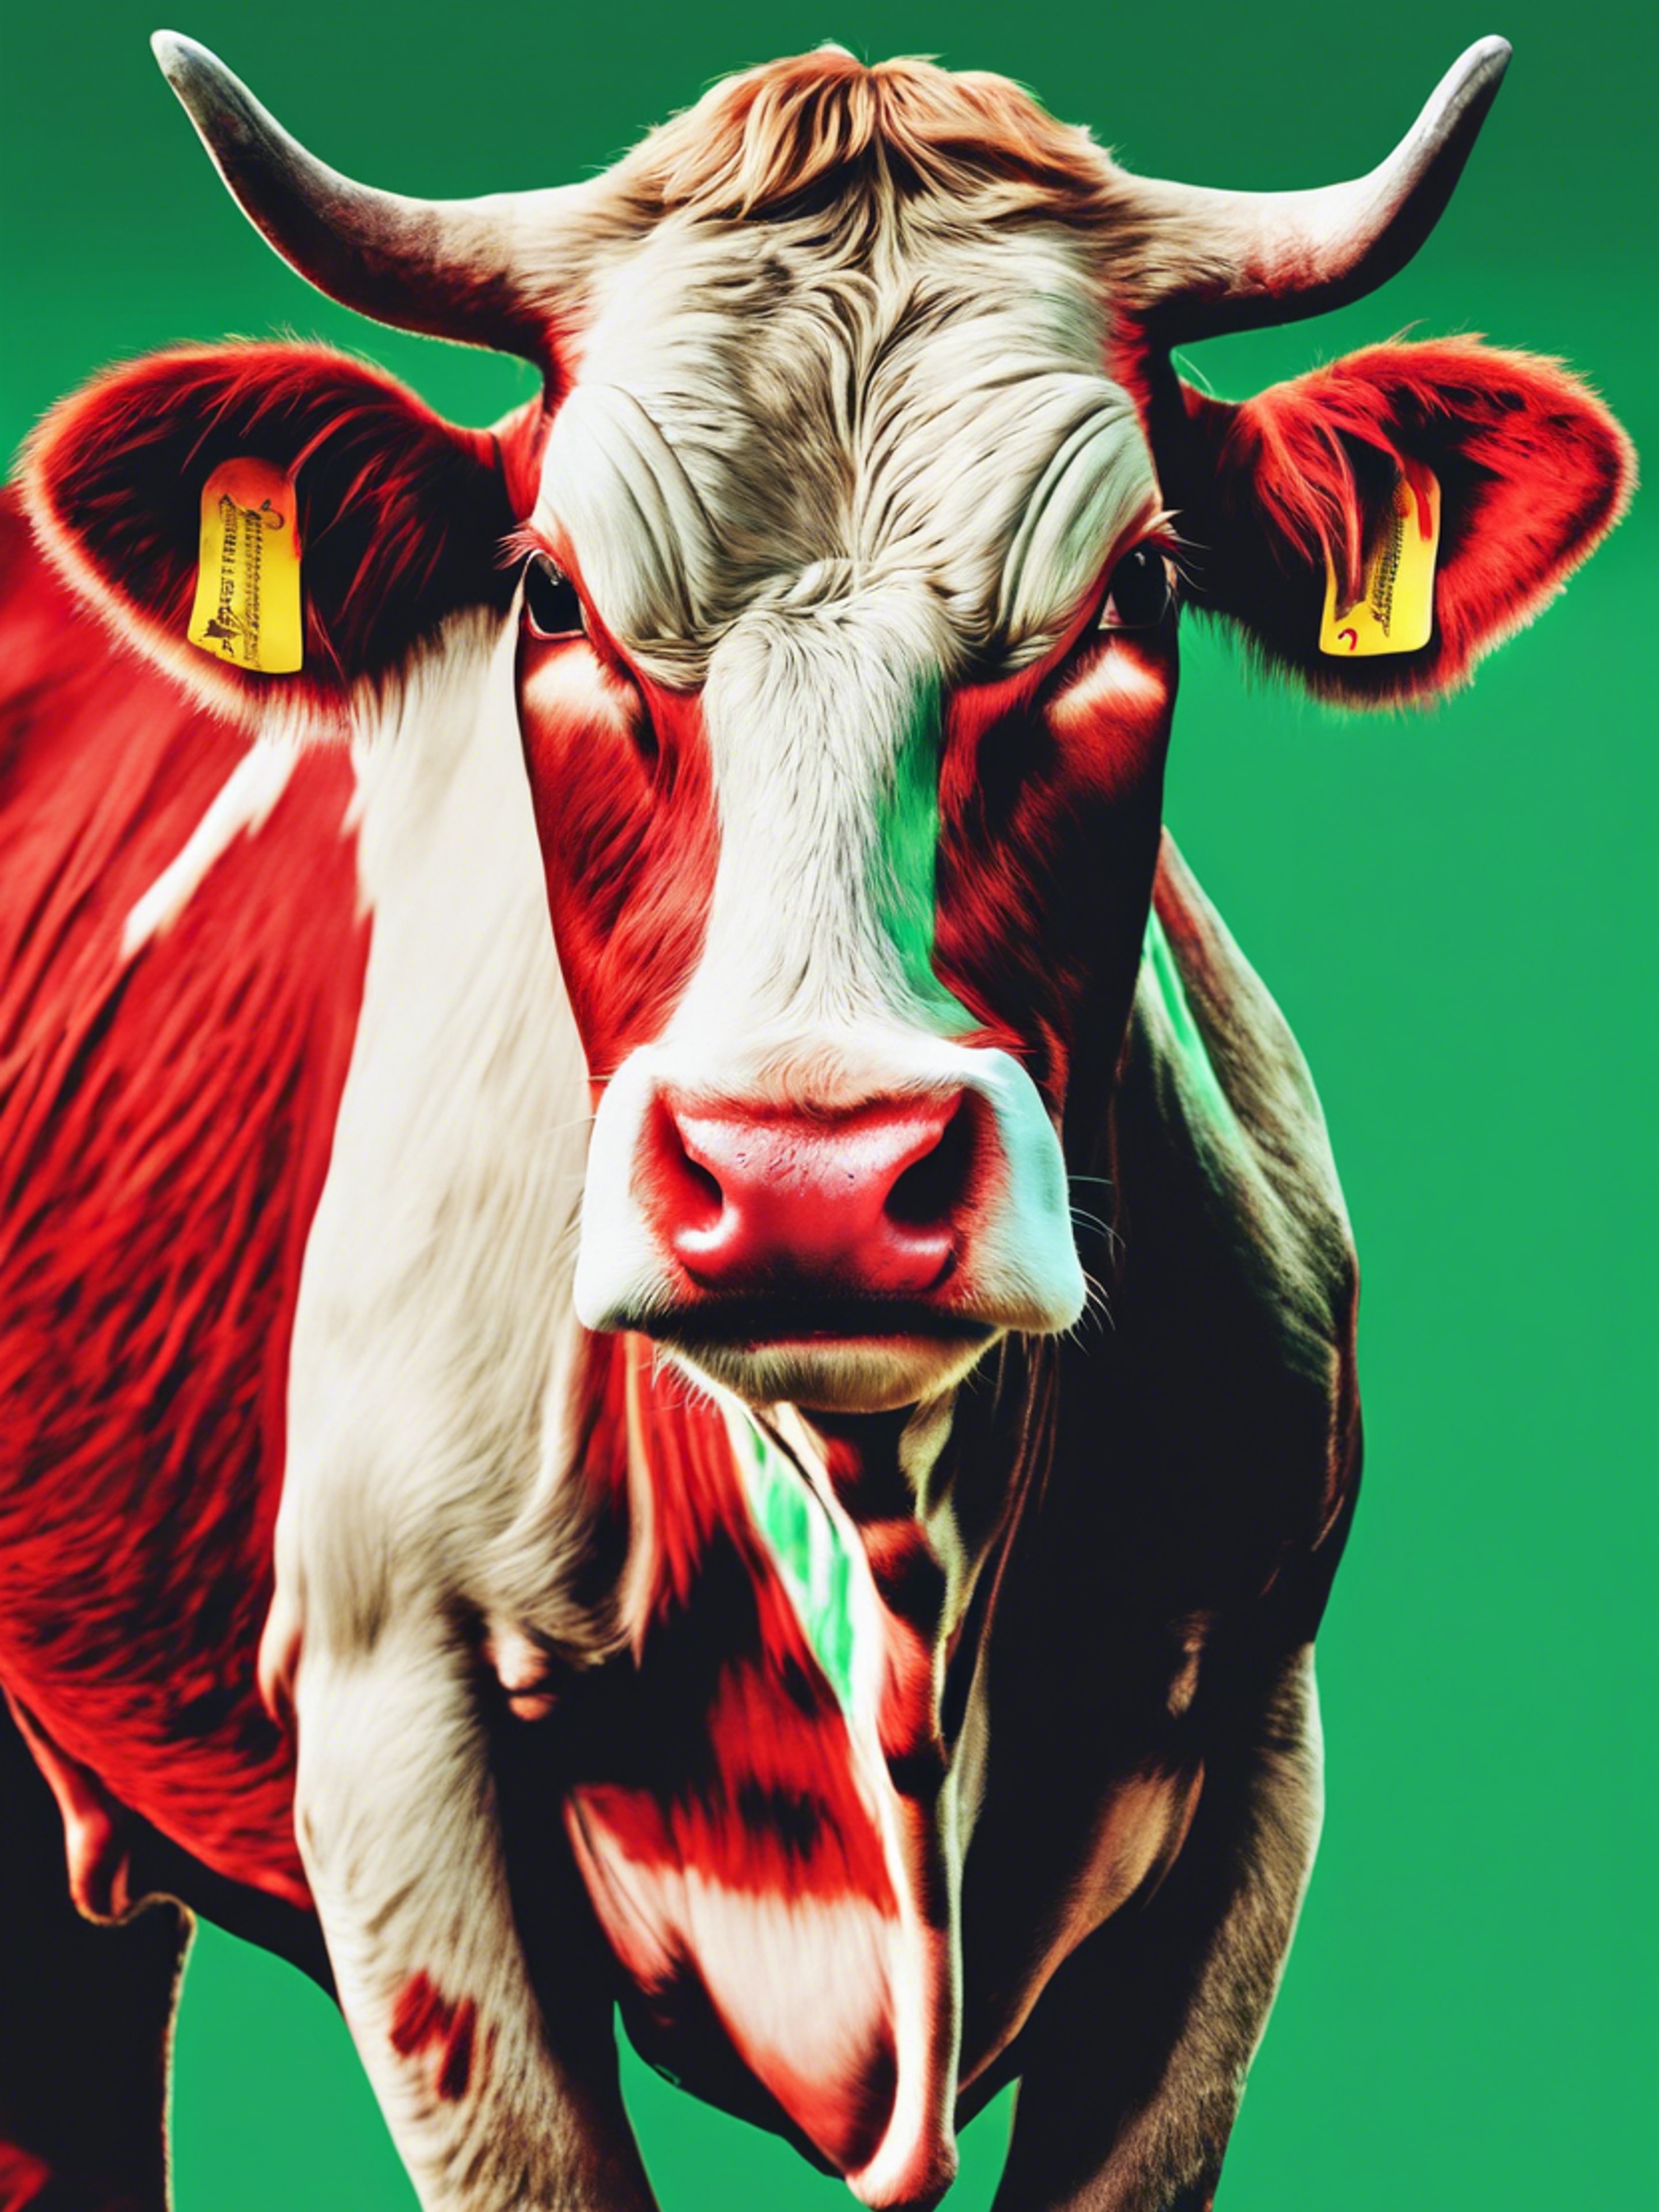 Pop-art style cow print in a palette of red and green. 牆紙[5b65906f2b9649418c8c]